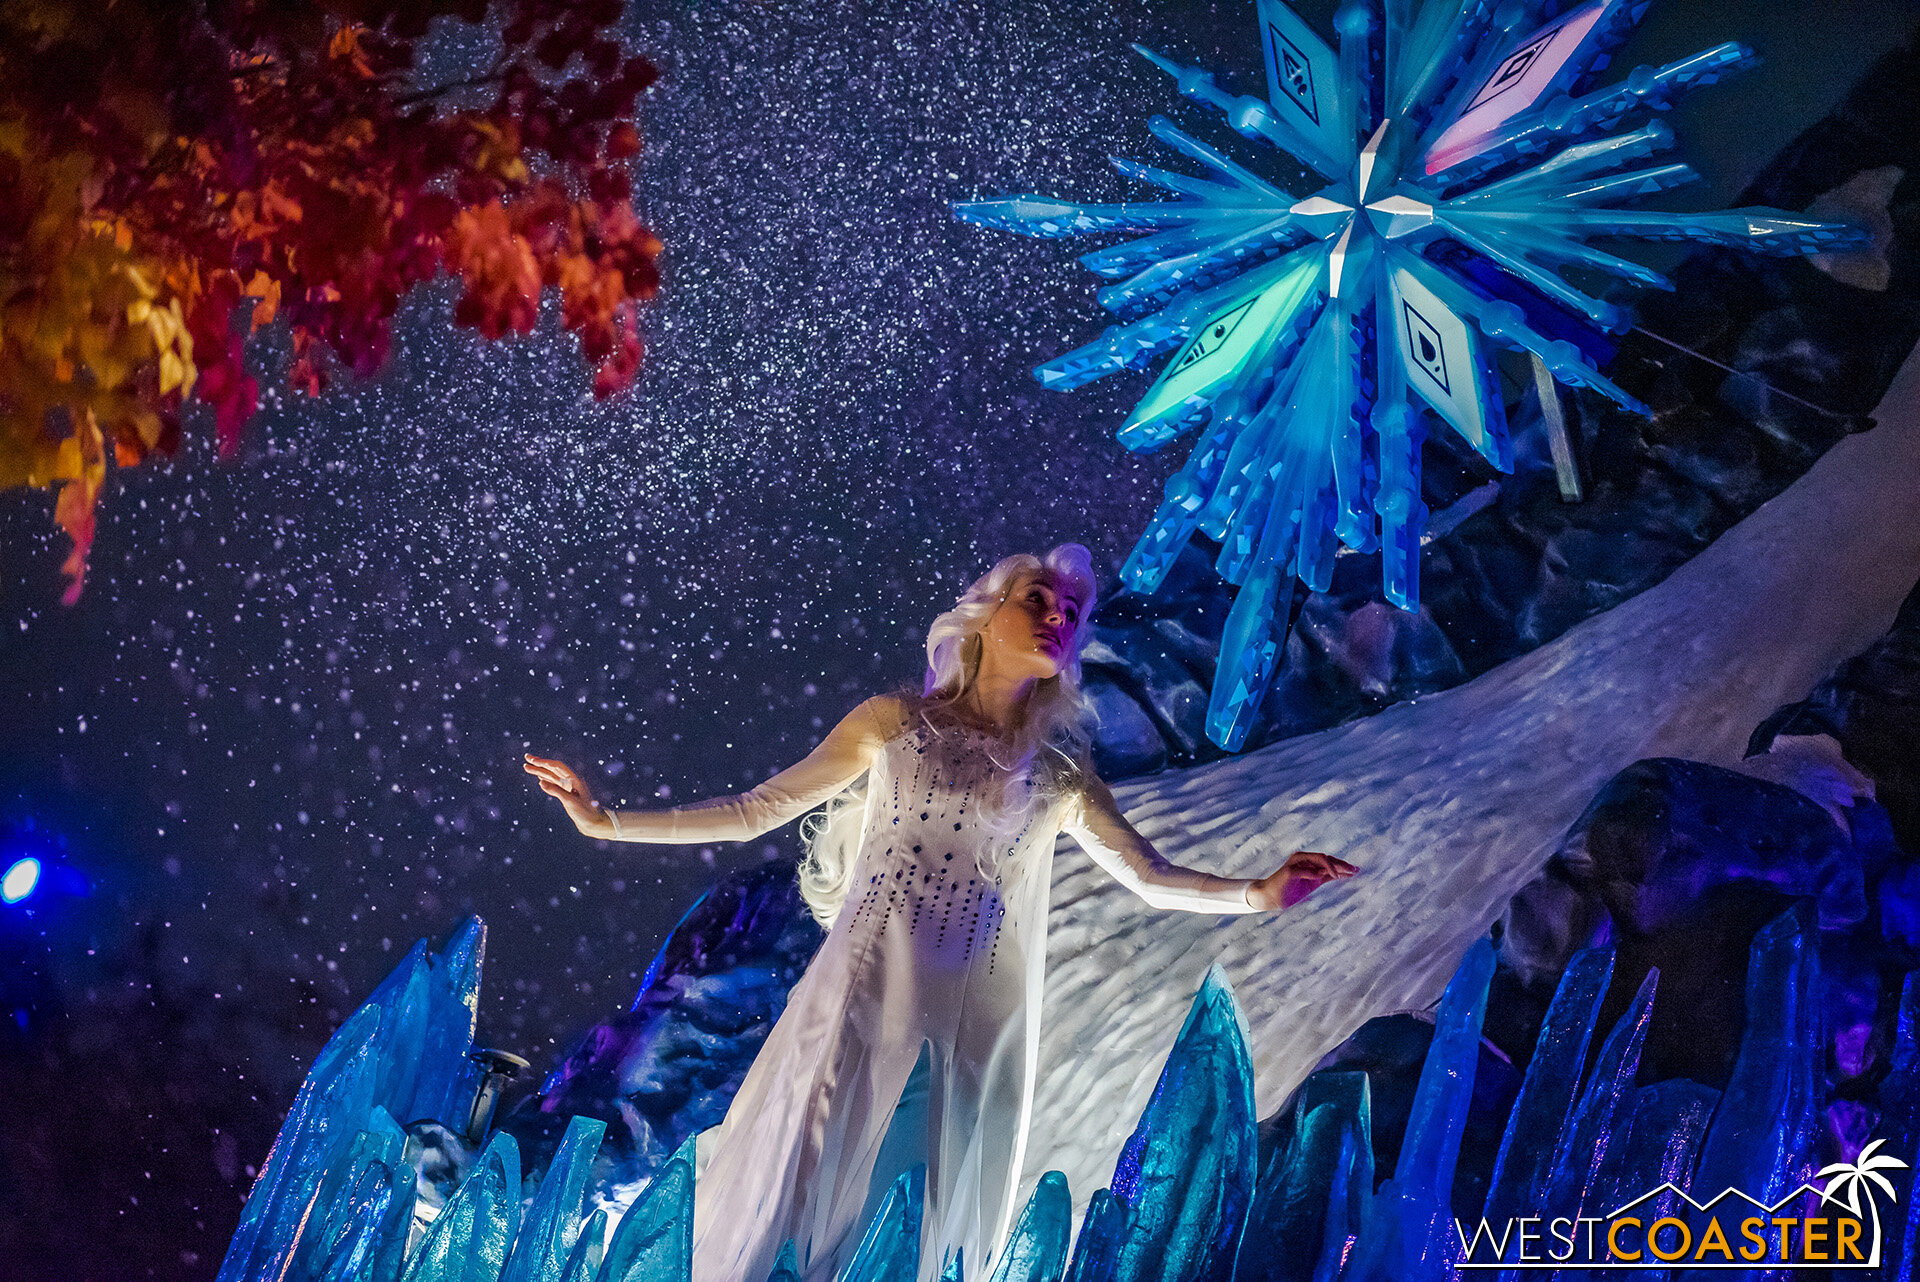  Elsa strikes a dramatic figure, high on the icy and shimmering mountaintop, under an iconic snowflake featuring symbols of the four elements as shown in the movie. 